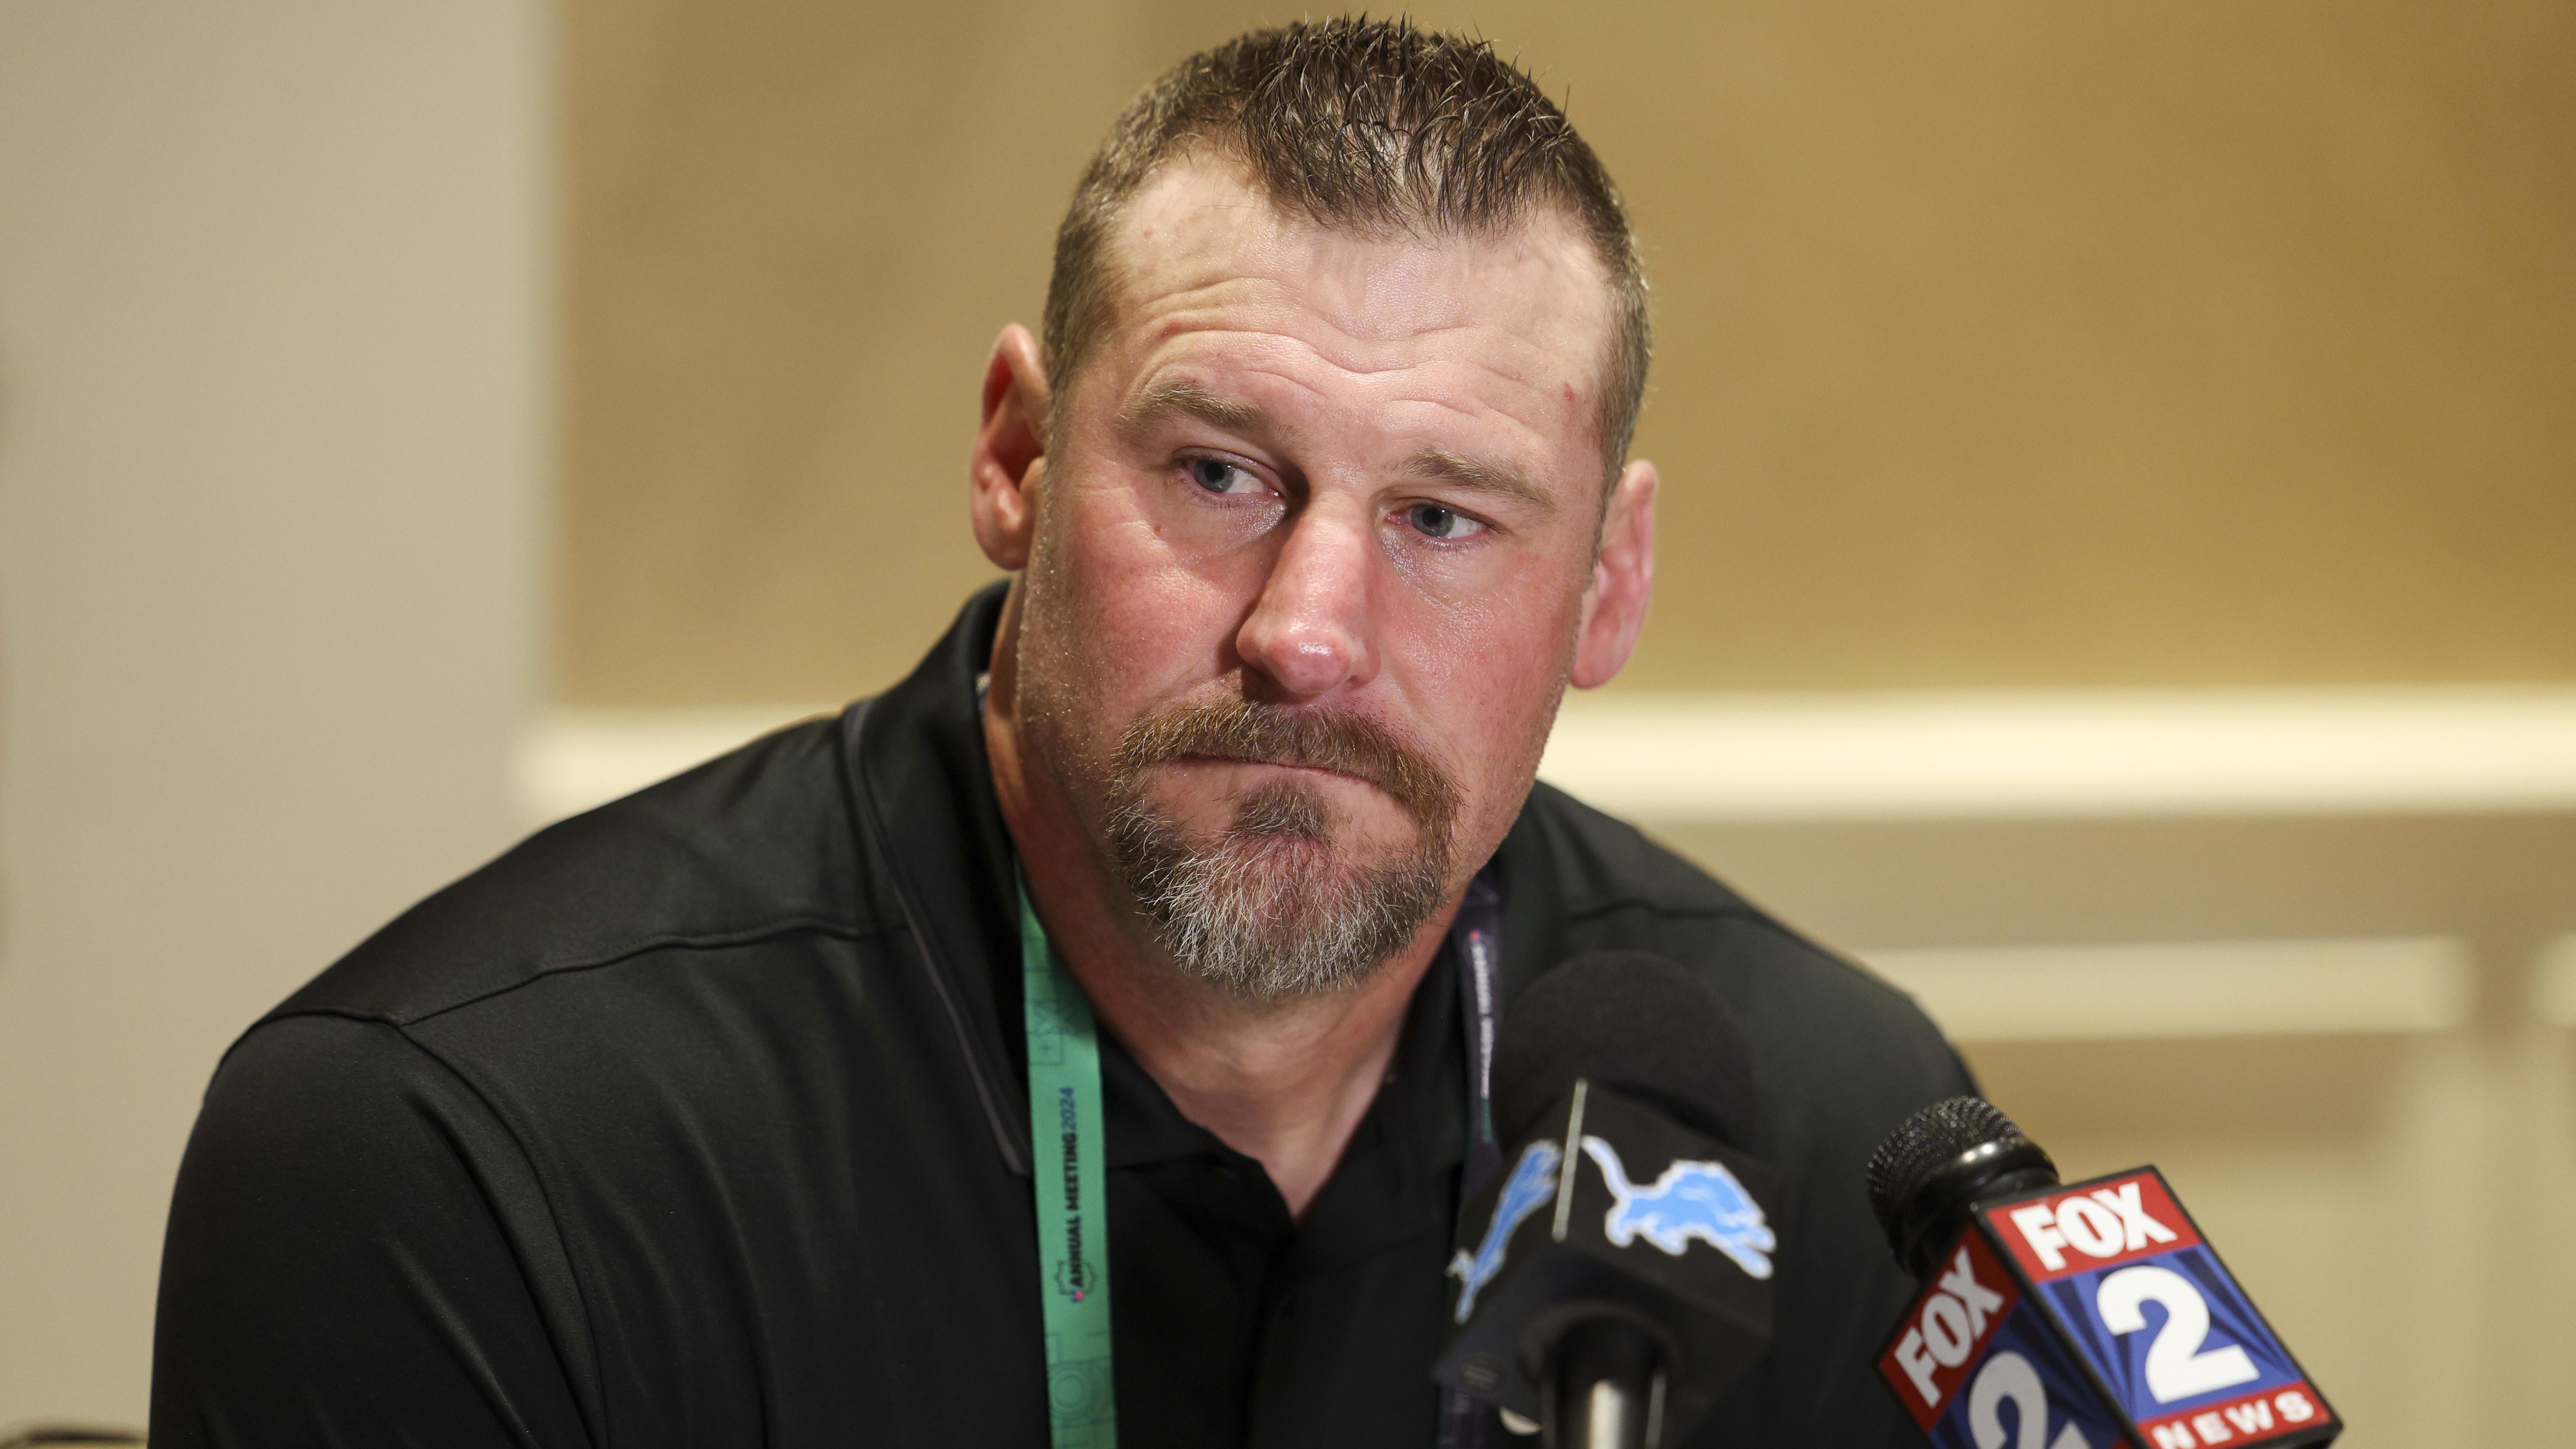 Detroit Lions head coach Dan Campbell speaks to the media during the NFL's annual league meeting.